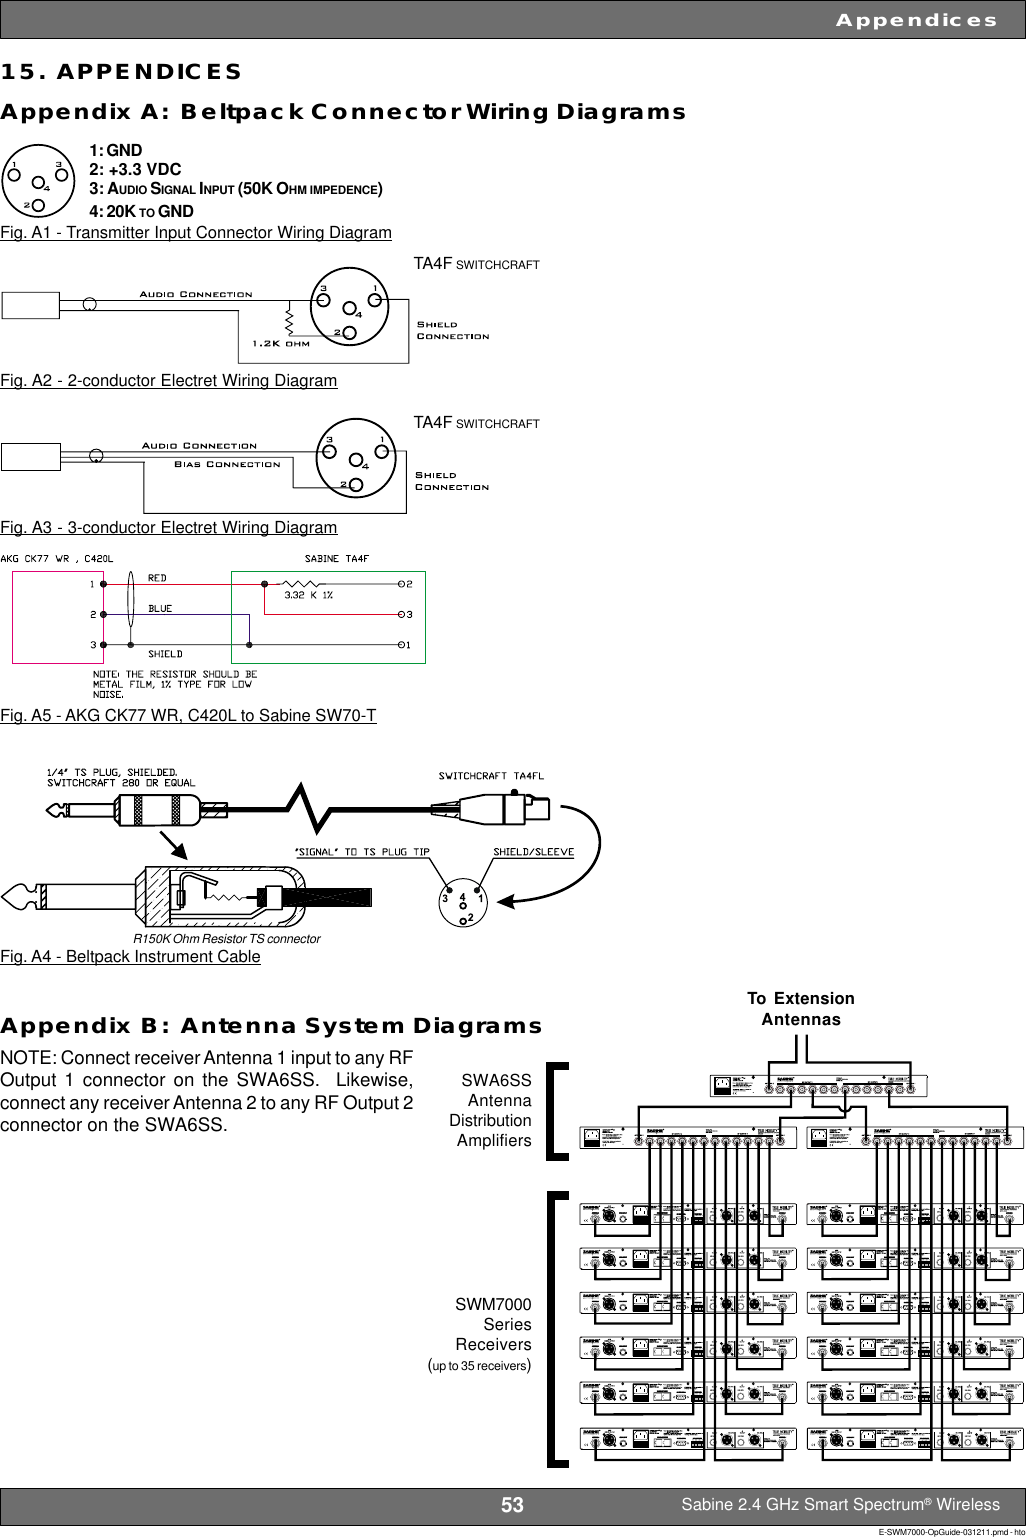 53 Sabine 2.4 GHz Smart Spectrum® WirelessE-SWM7000-OpGuide-031211.pmd - htoAppendices15.  APPENDICESAppendix A:  Beltpack Connector Wiring DiagramsFig. A2 - 2-conductor Electret Wiring DiagramTo ExtensionAntennasAppendix B:  Antenna System DiagramsSWA6SSAntennaDistributionAmplifiersSWM7000SeriesReceivers(up to 35 receivers)NOTE: Connect receiver Antenna 1 input to any RFOutput 1 connector on the SWA6SS.  Likewise,connect any receiver Antenna 2 to any RF Output 2connector on the SWA6SS.Fig. A5 - AKG CK77 WR, C420L to Sabine SW70-TR150K Ohm Resistor TS connectorFig. A4 - Beltpack Instrument CableTA4F SWITCHCRAFTFig. A3 - 3-conductor Electret Wiring DiagramTA4F SWITCHCRAFTFig. A1 - Transmitter Input Connector Wiring Diagram1: GND2: +3.3 VDC3: AUDIO SIGNAL INPUT (50K OHM IMPEDENCE)4: 20K TO GND